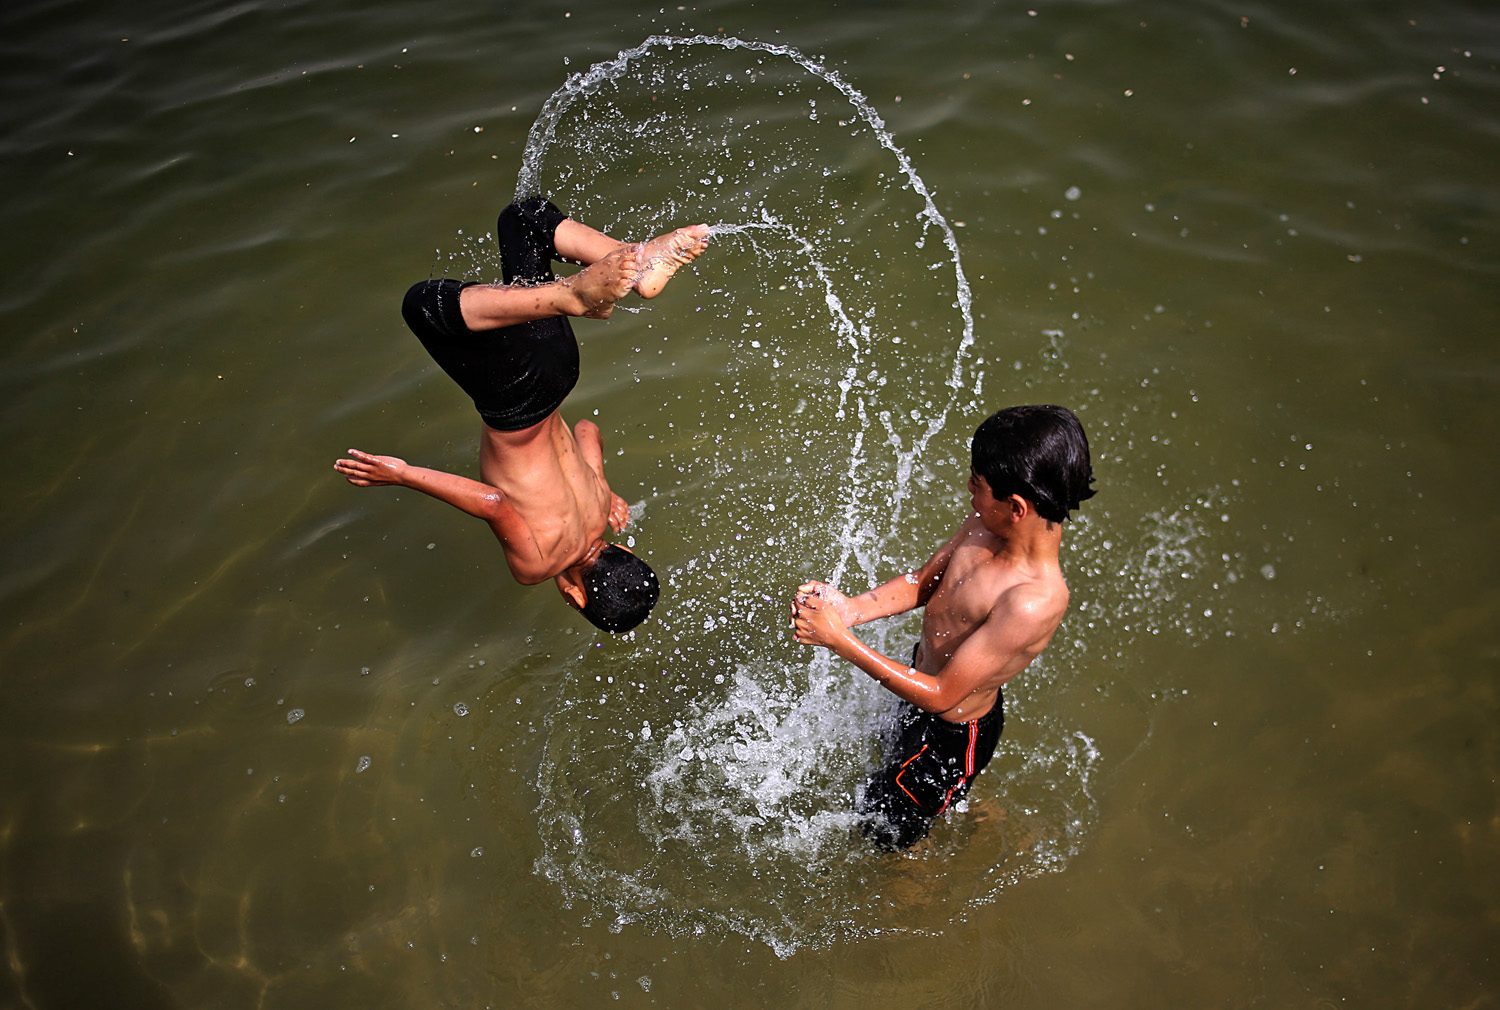 Refreshing from a hot day in Gaza